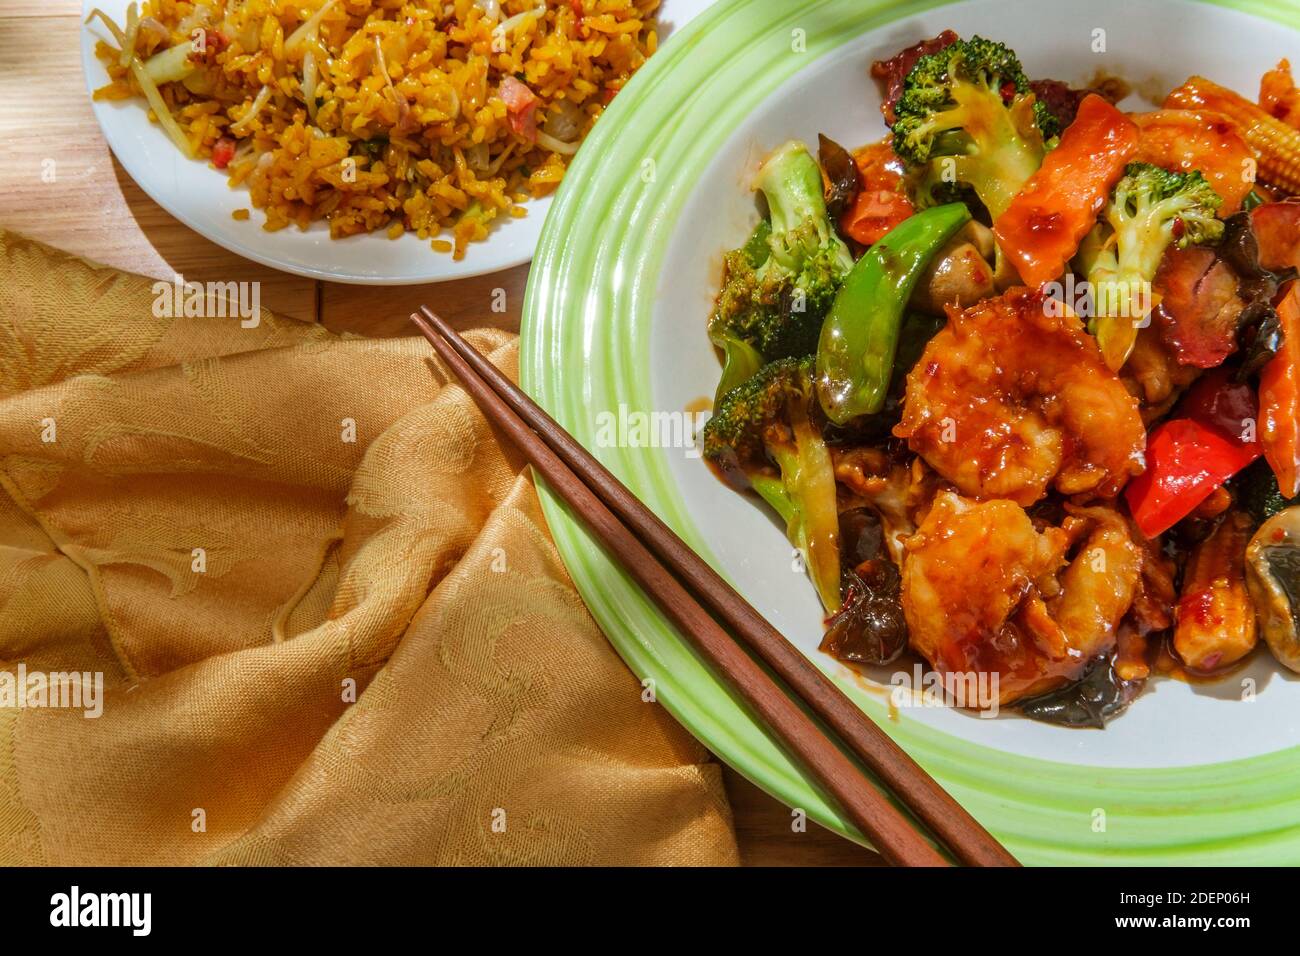 Chinese Triple Delight Shrimp Chicken And Pork With Side Of Fried Rice Stock Photo Alamy